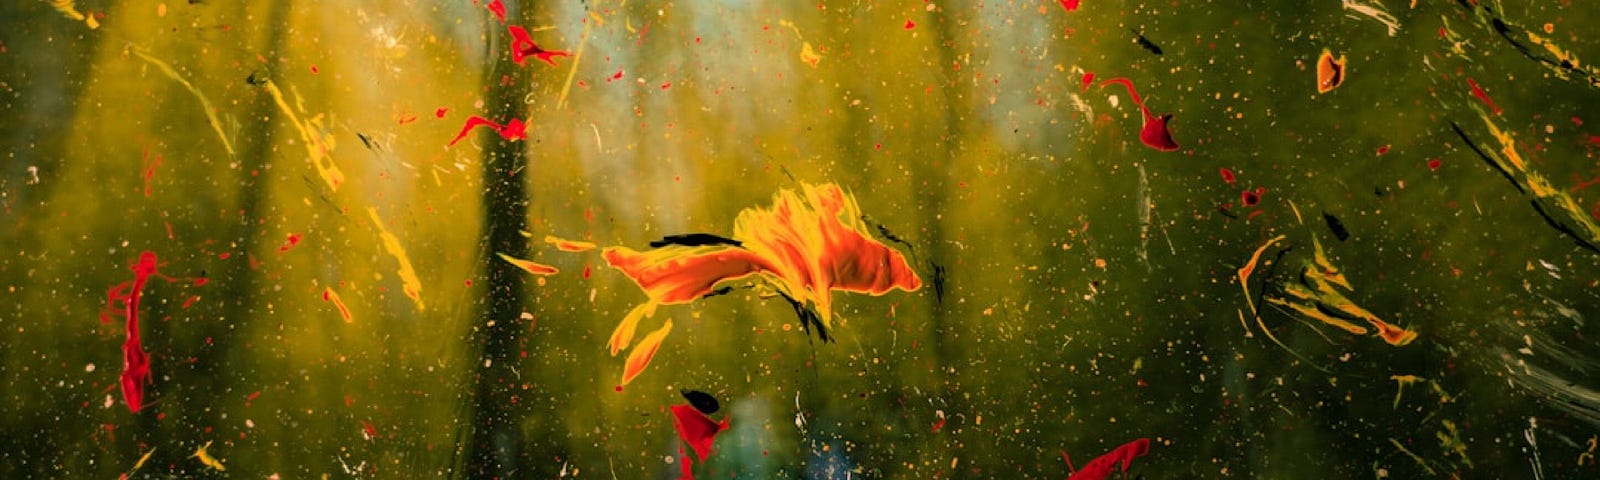 An abstract image. Mostly dark brown, perhaps shadows of trees rising in the background, on the forefront of image, like a painting, are intense yellow, red, orange splashes or brush strokes. The bright colors capture the intensity on a dull landscape.